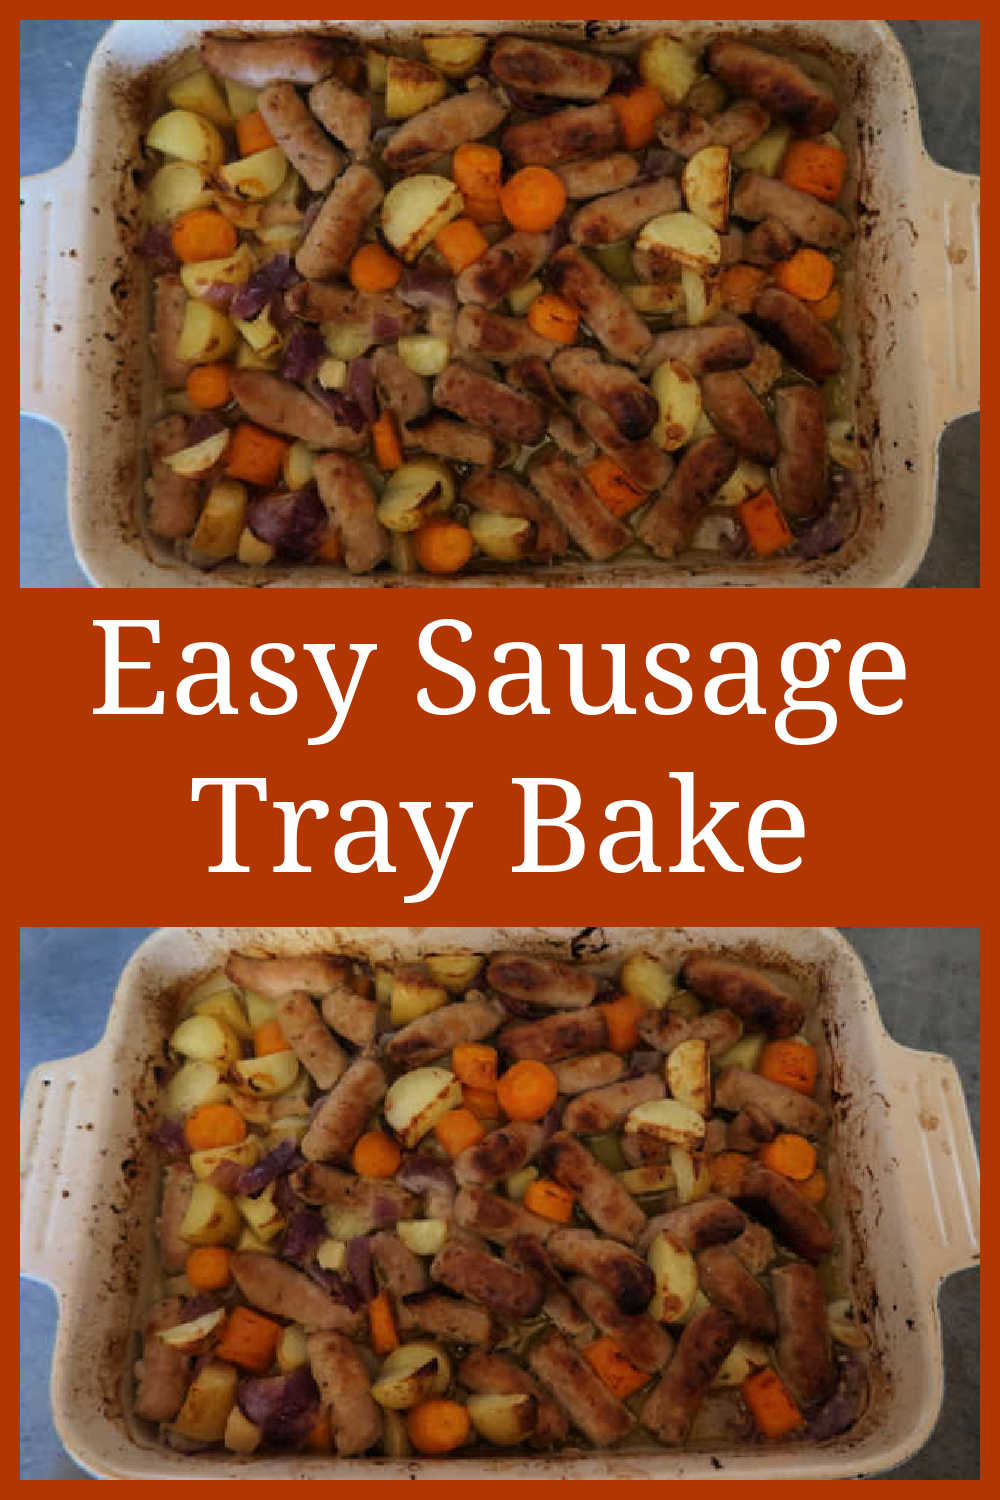 Sausage Tray Bake Recipe – How to make an easy budget friendly quick dinner meal with sausages, potatoes and vegetables – with the full video tutorial.